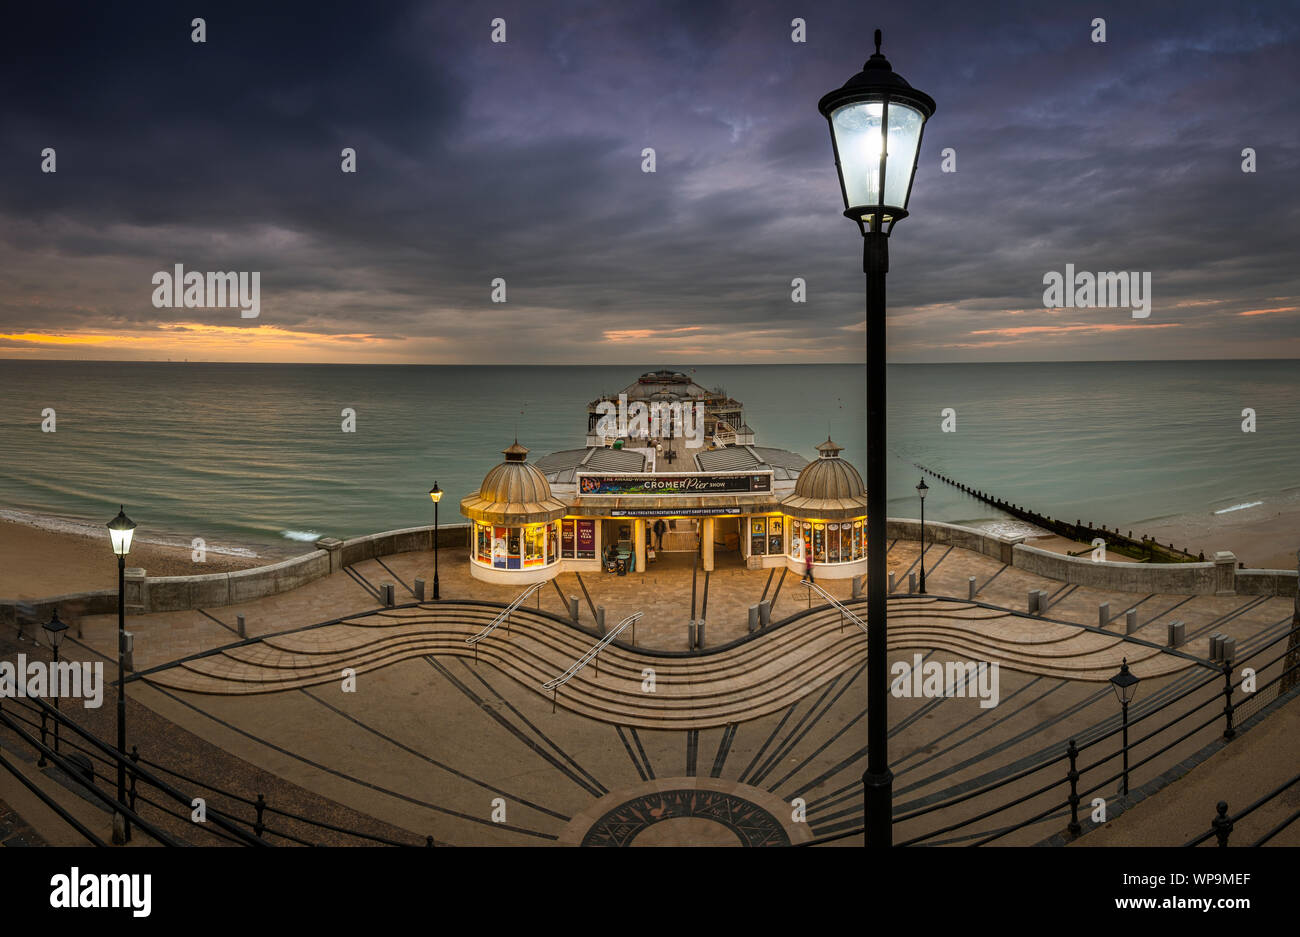 The street lights start to come on as the sun sets at Cromer pier. Stock Photo